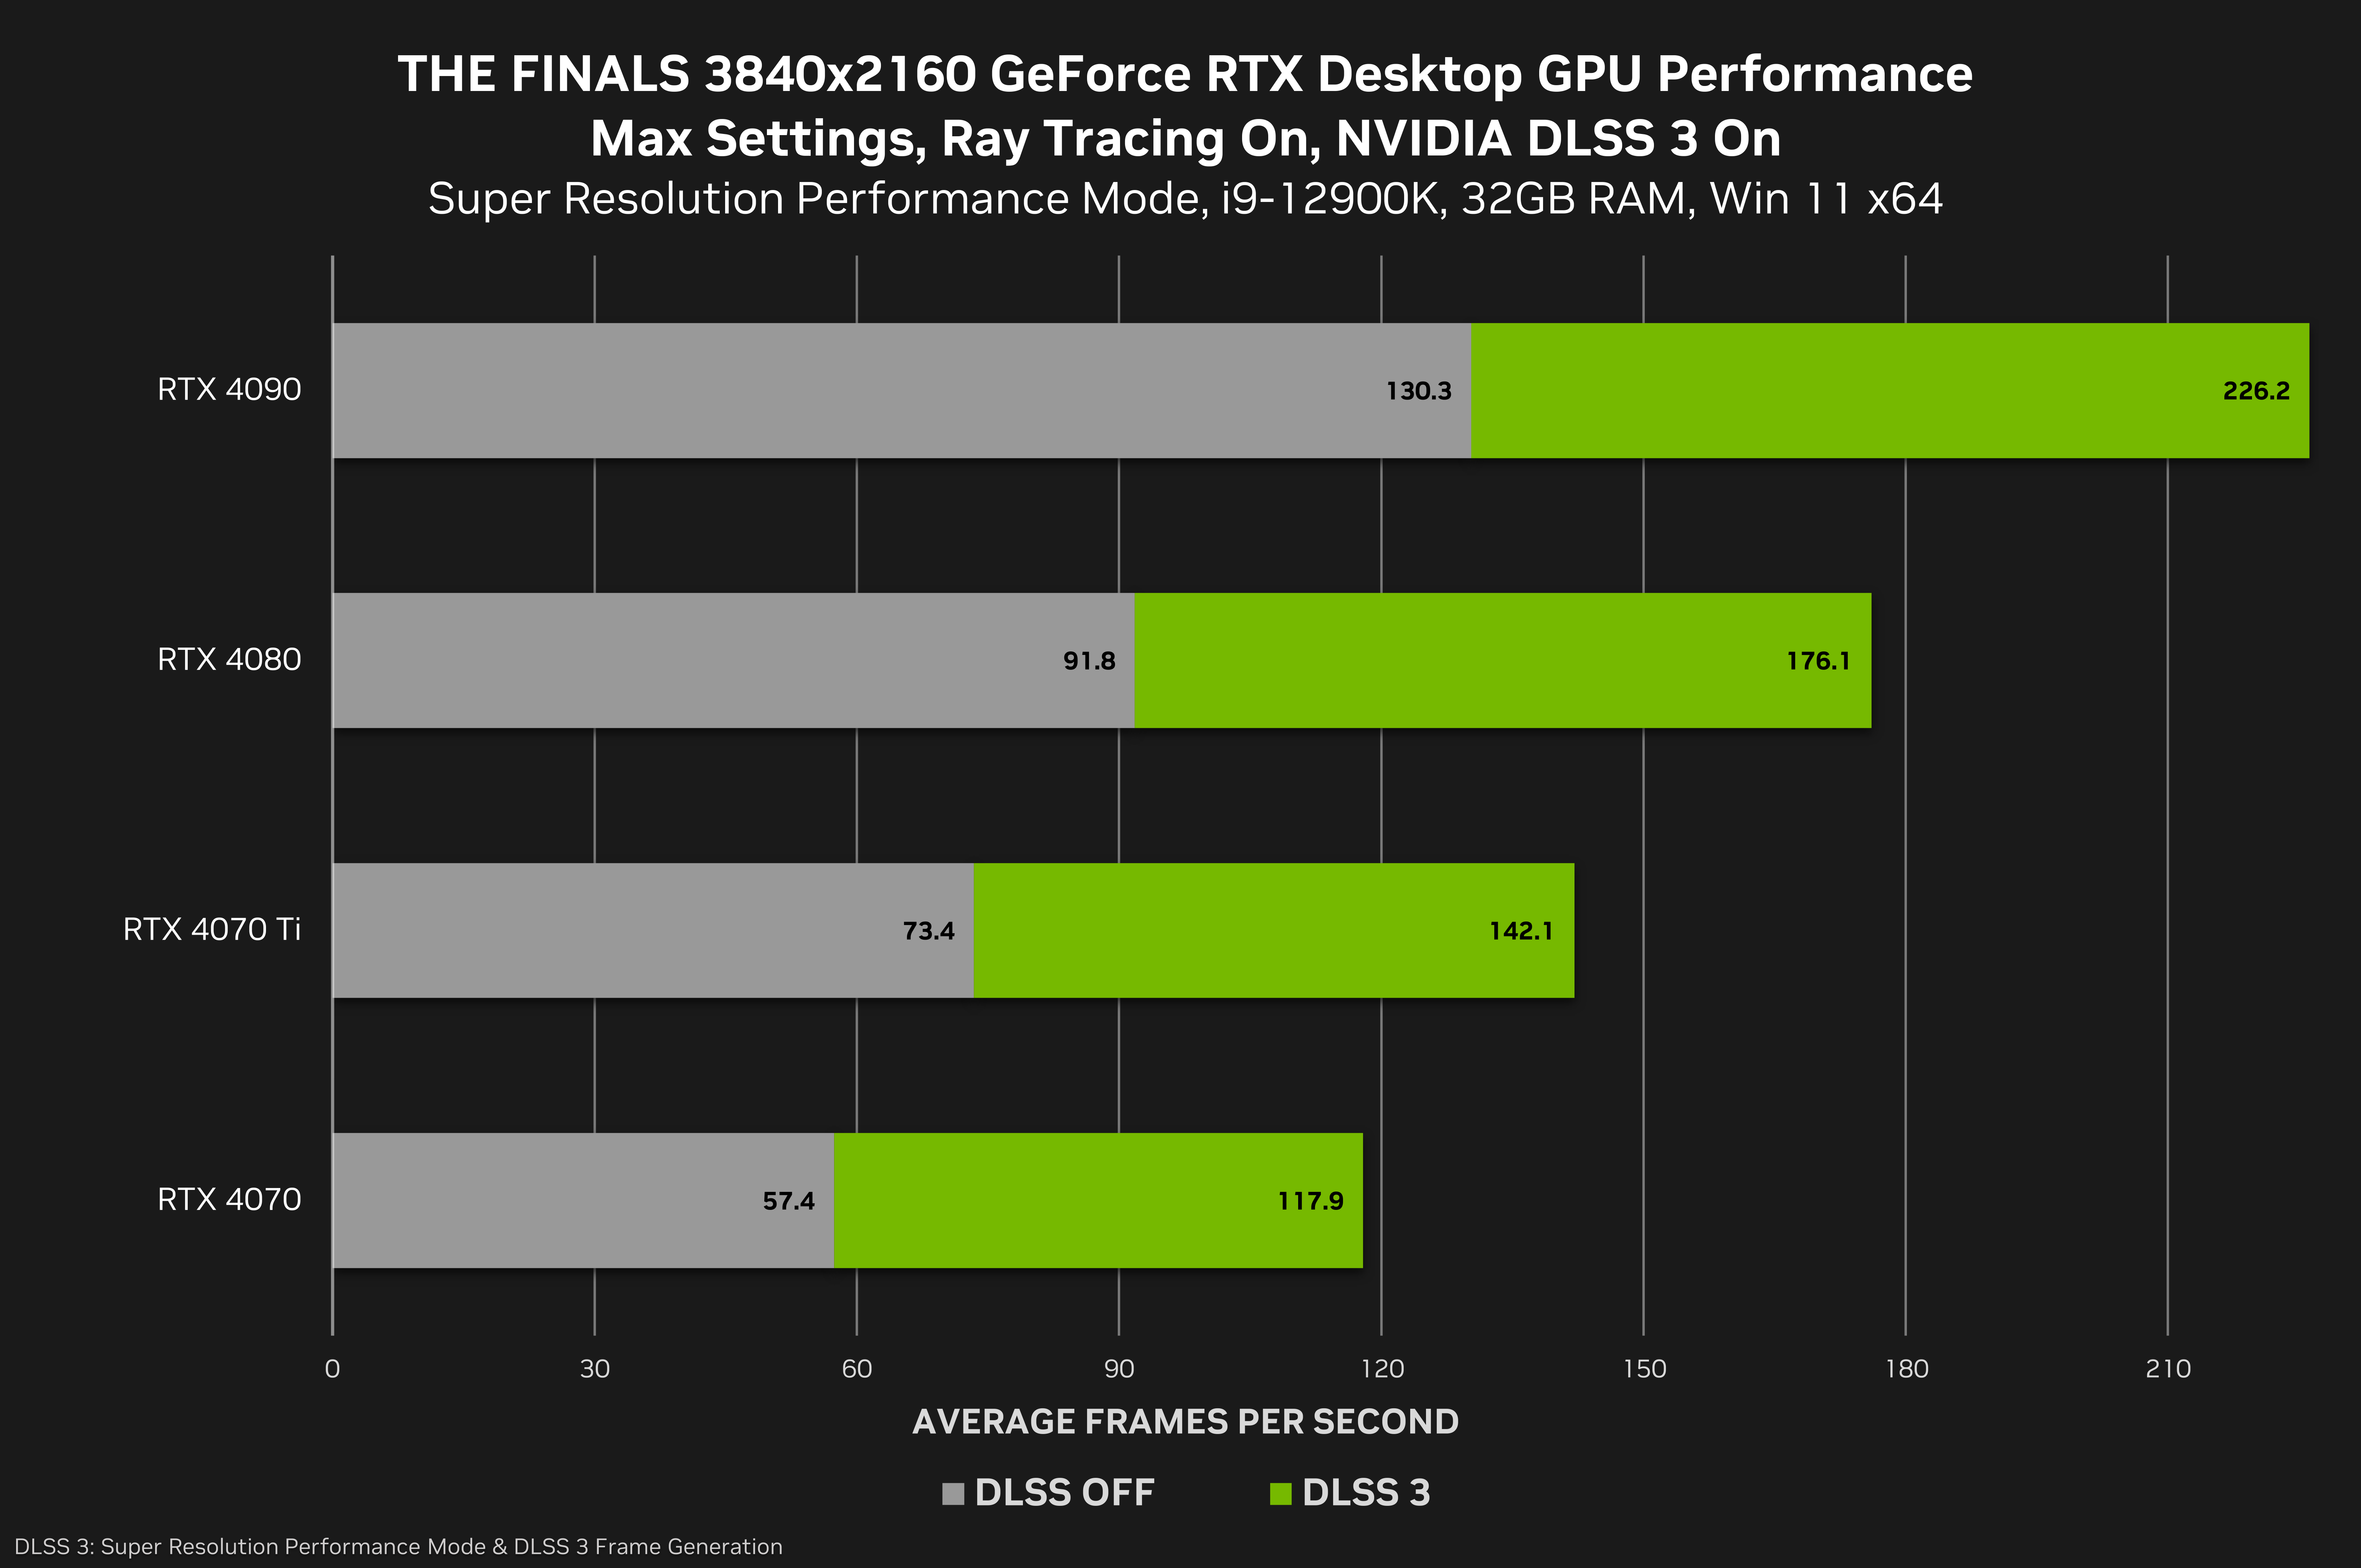 The best video settings for The Finals game -- High FPS